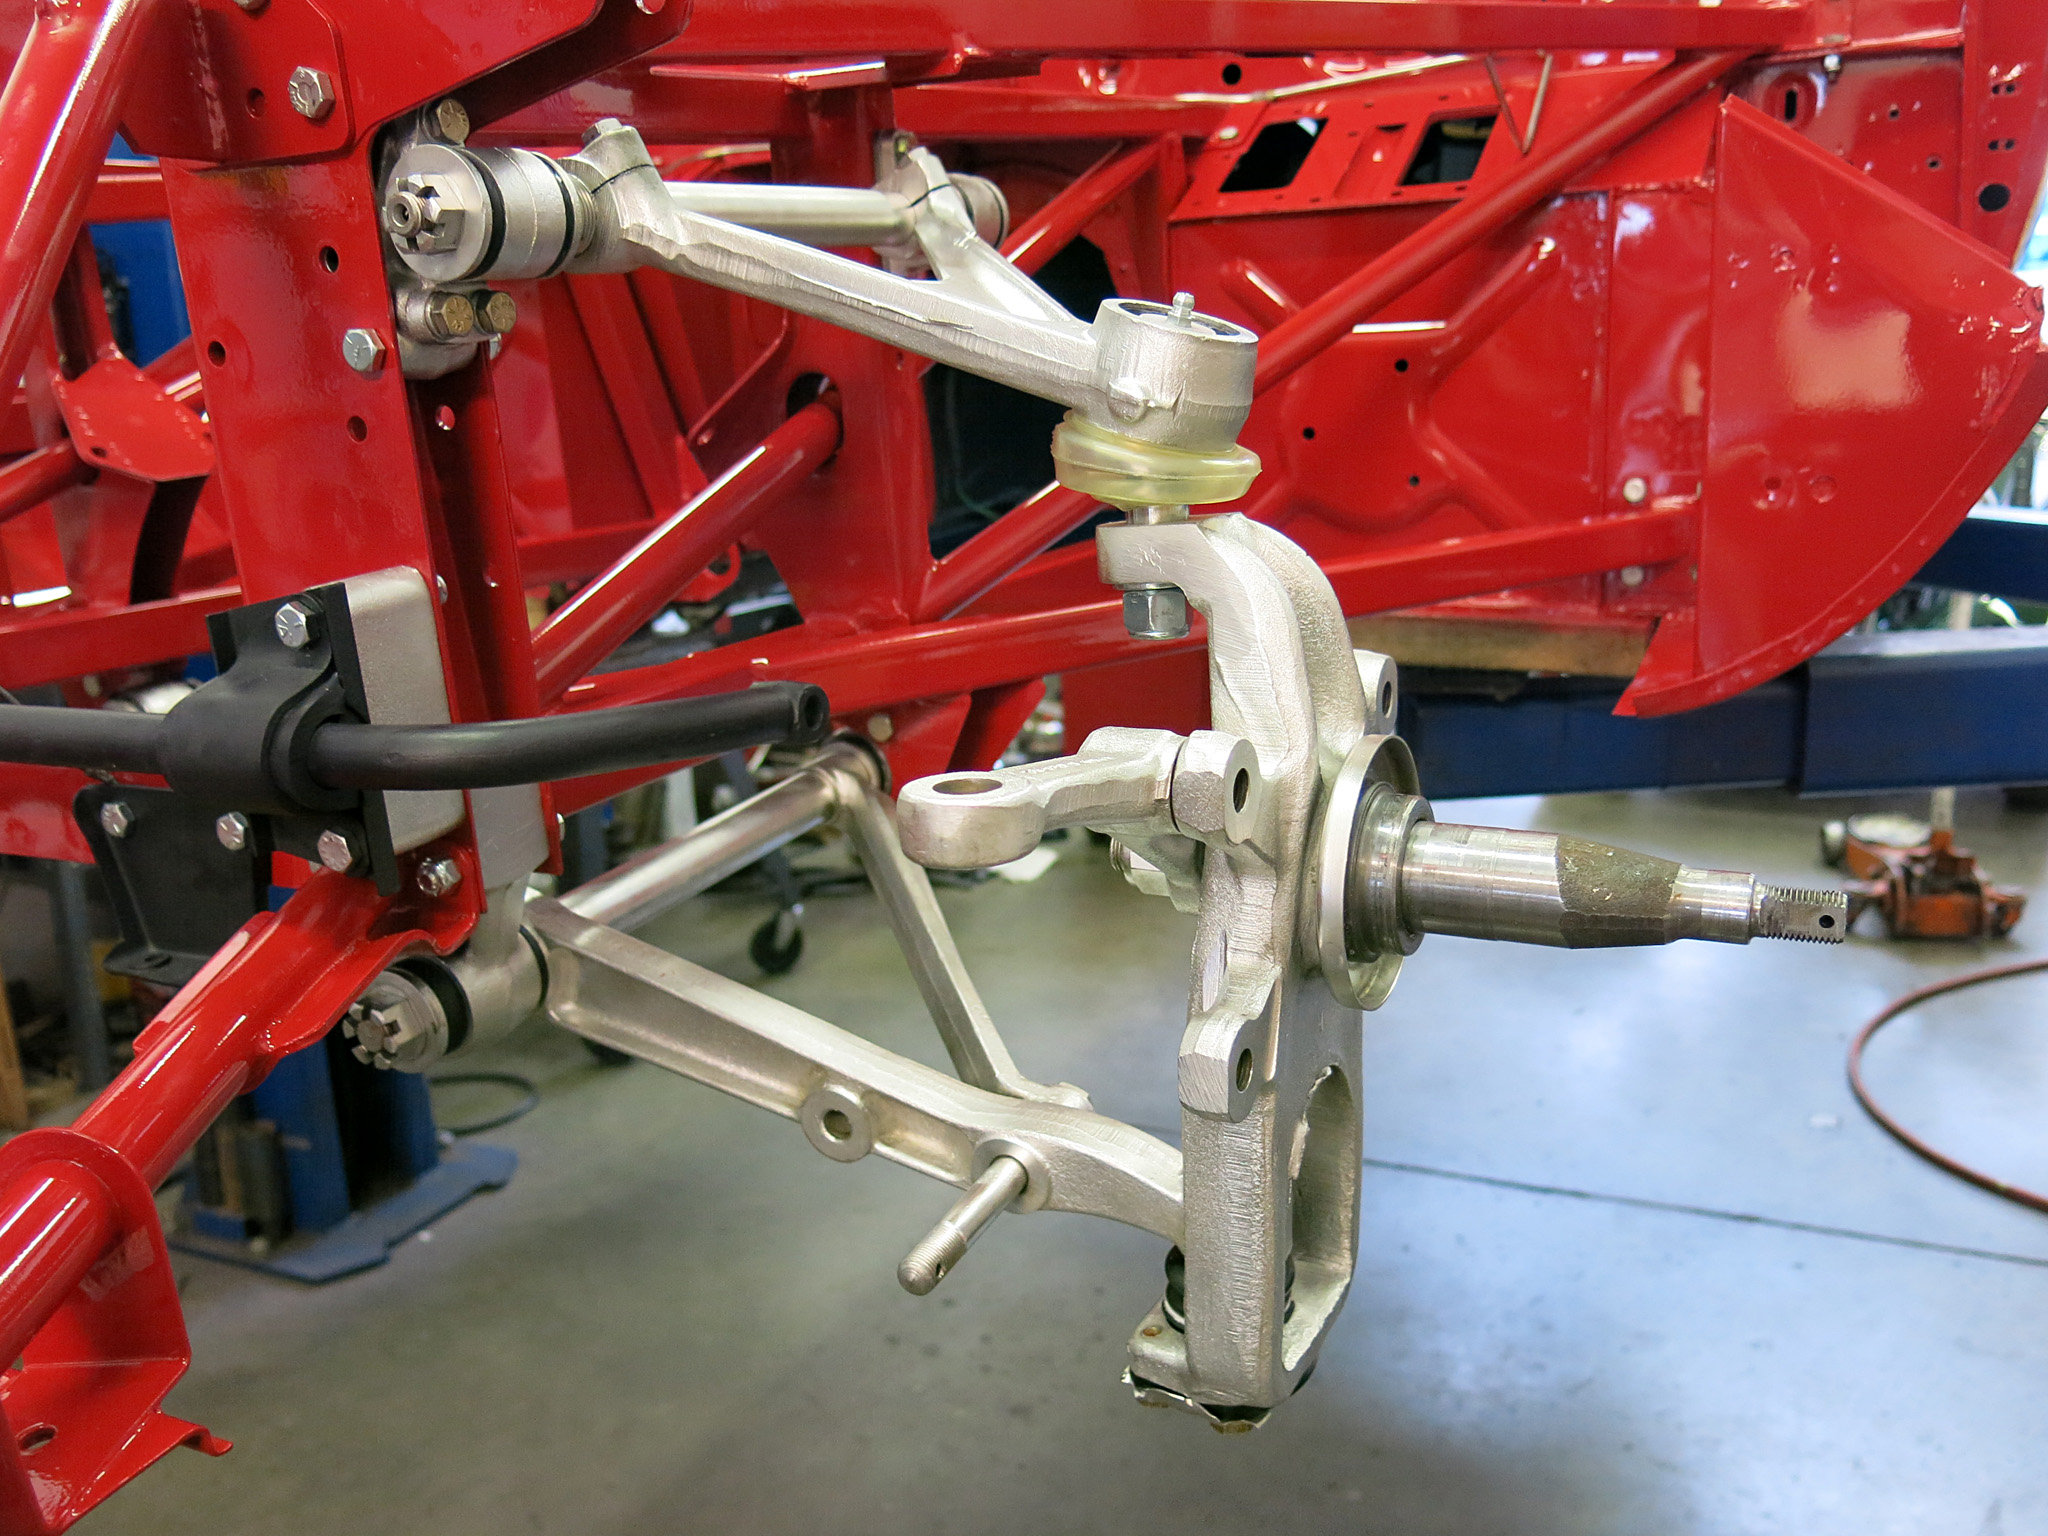 Nice image showing the plated control arms and stub axle carrier.